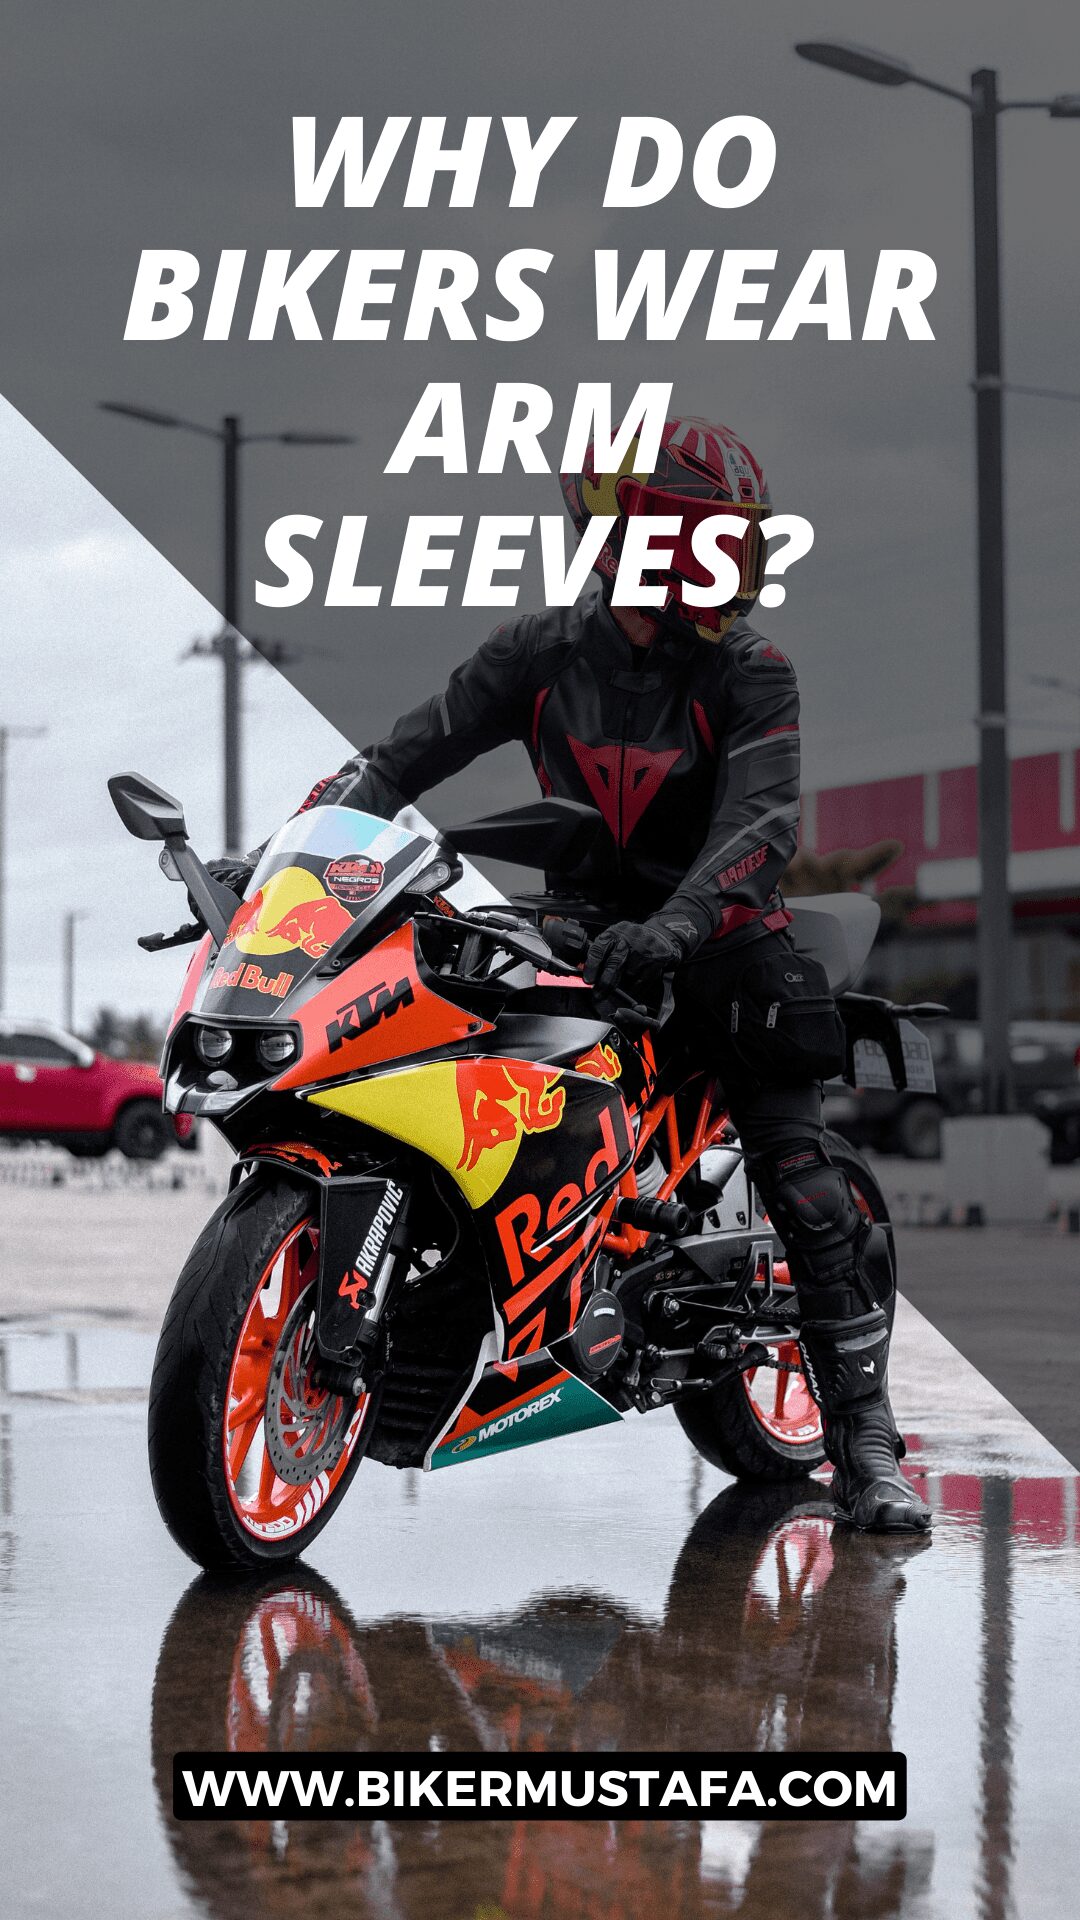 Why Do Bikers Wear Arm Sleeves?